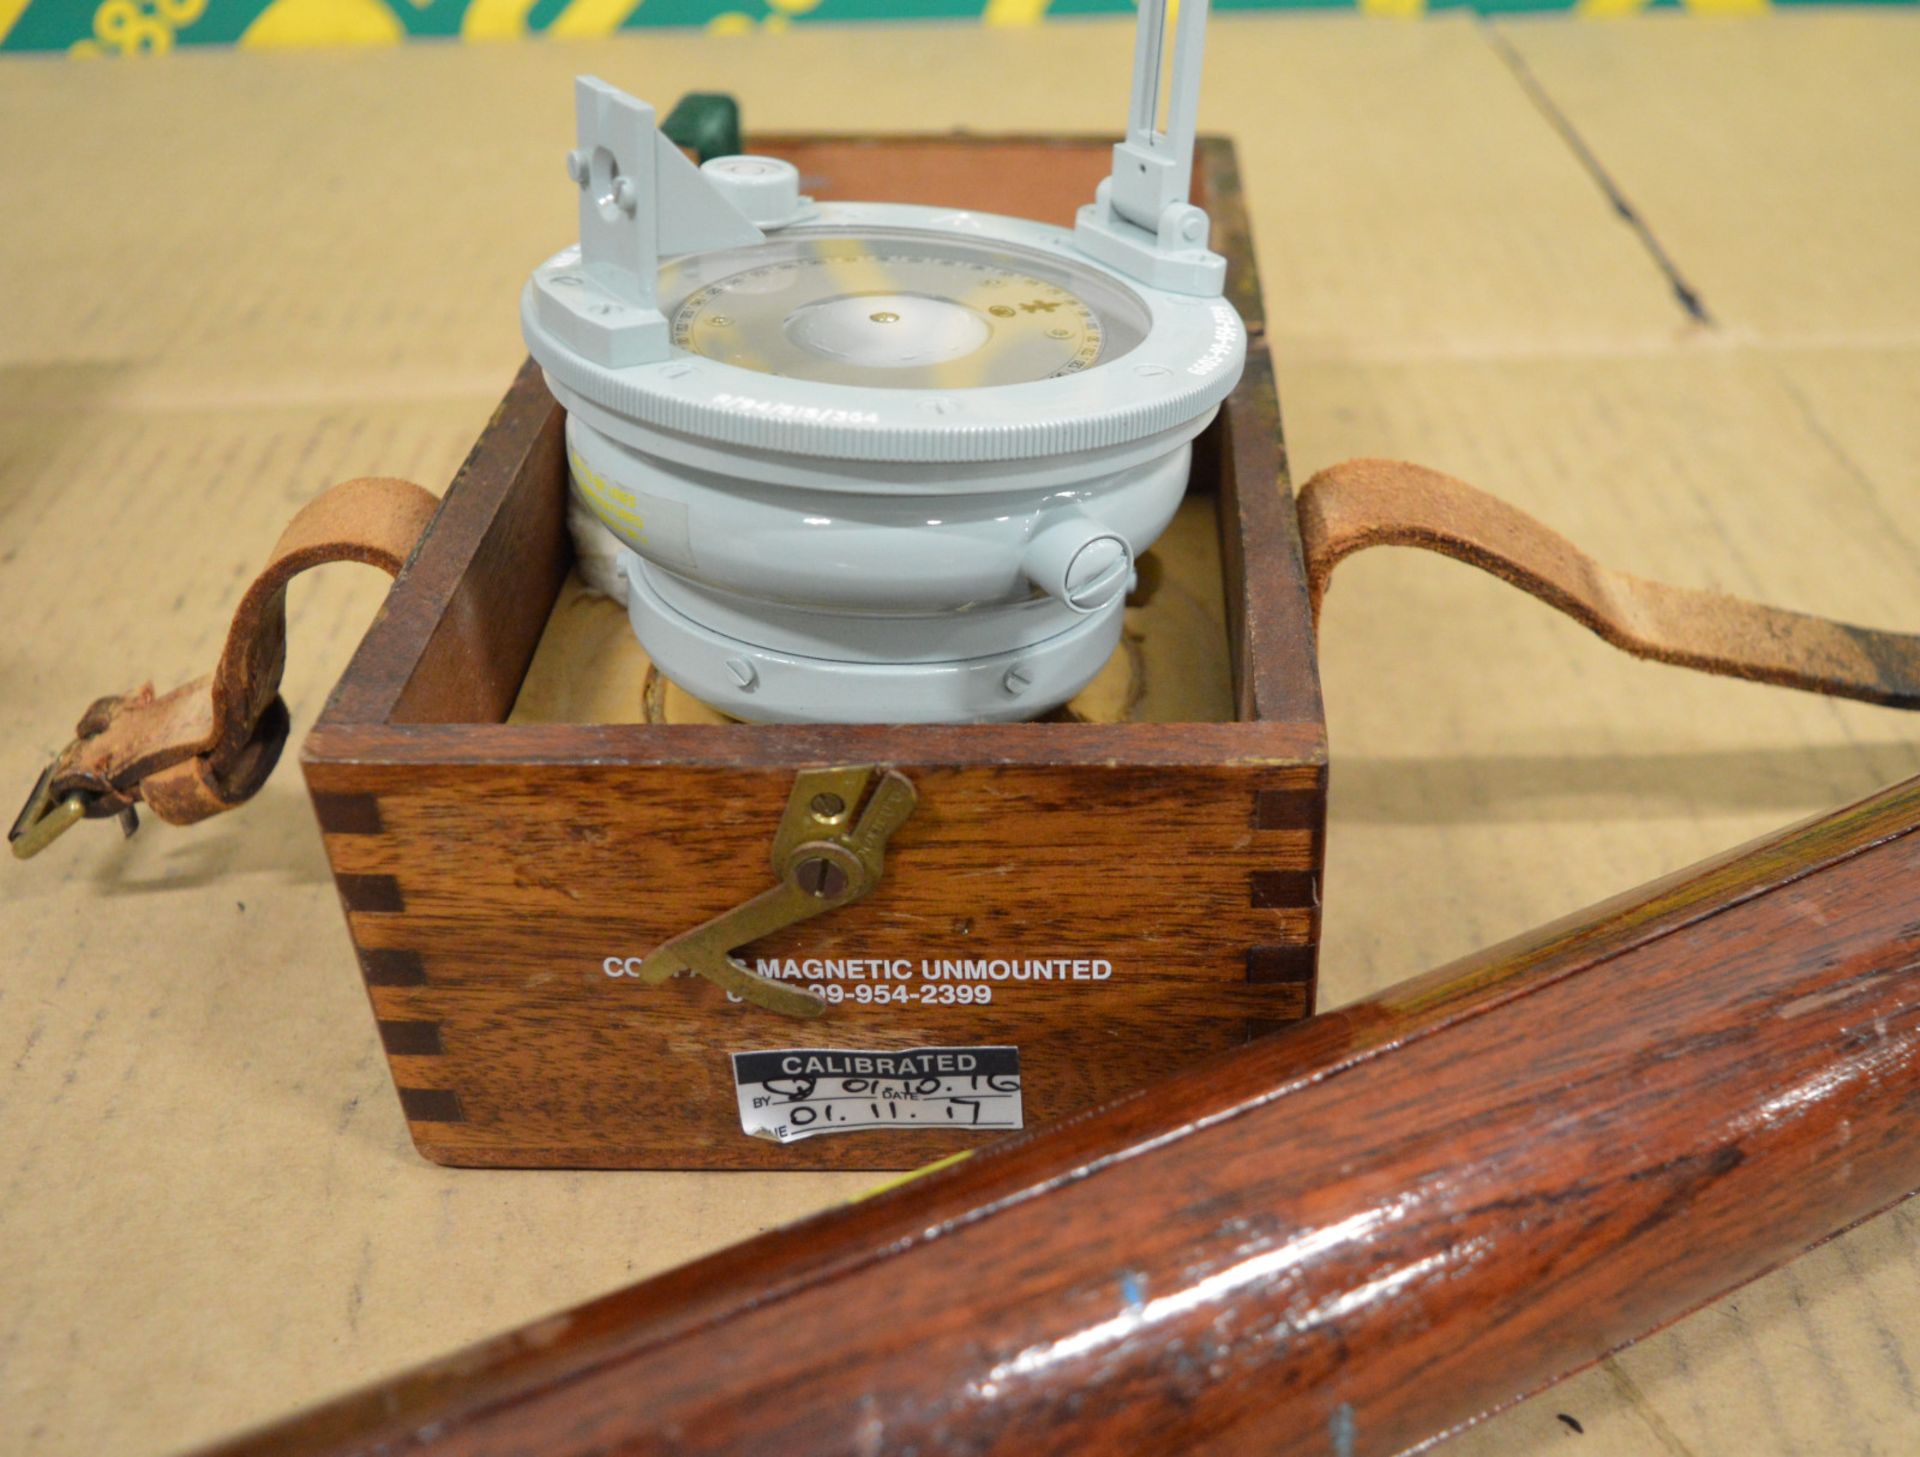 Mahogany Tripod with detachable Magnetic Compass in Wooden Case. - Image 2 of 2